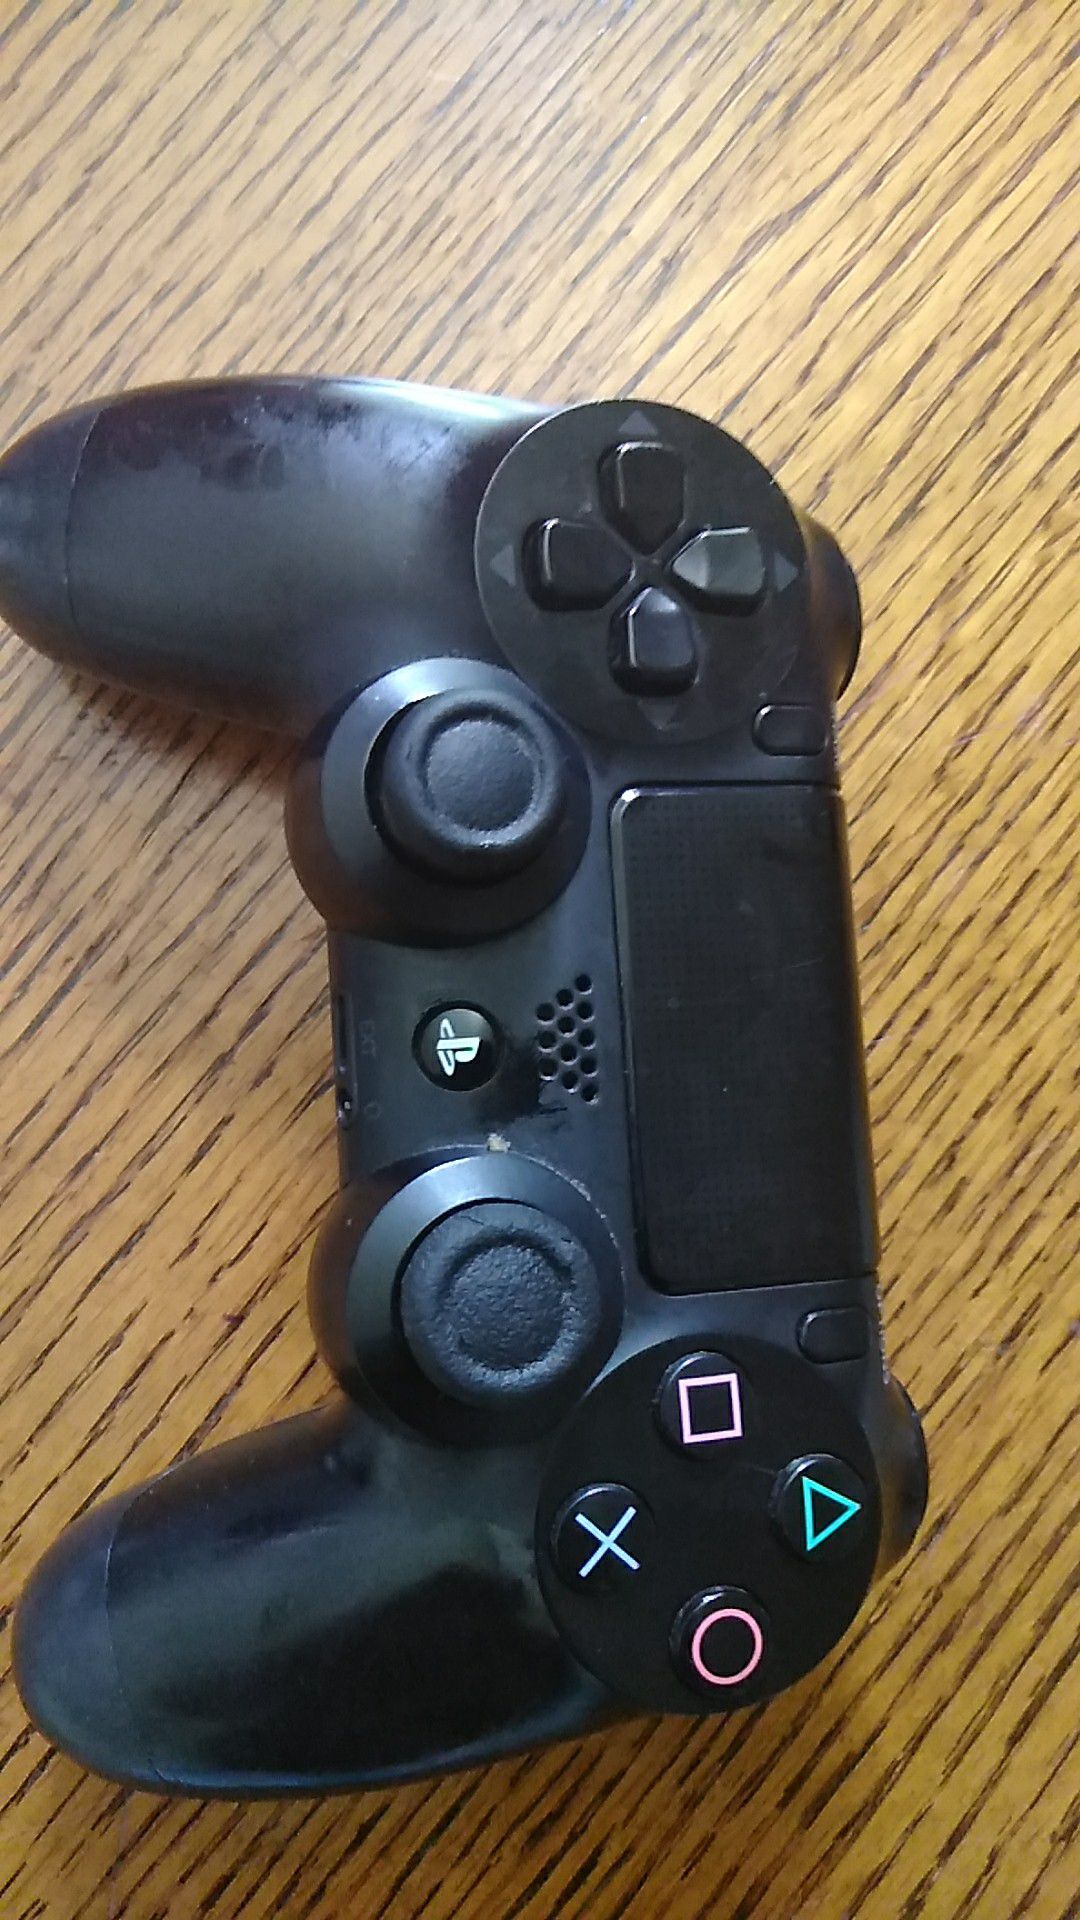 Ps4 remote controller